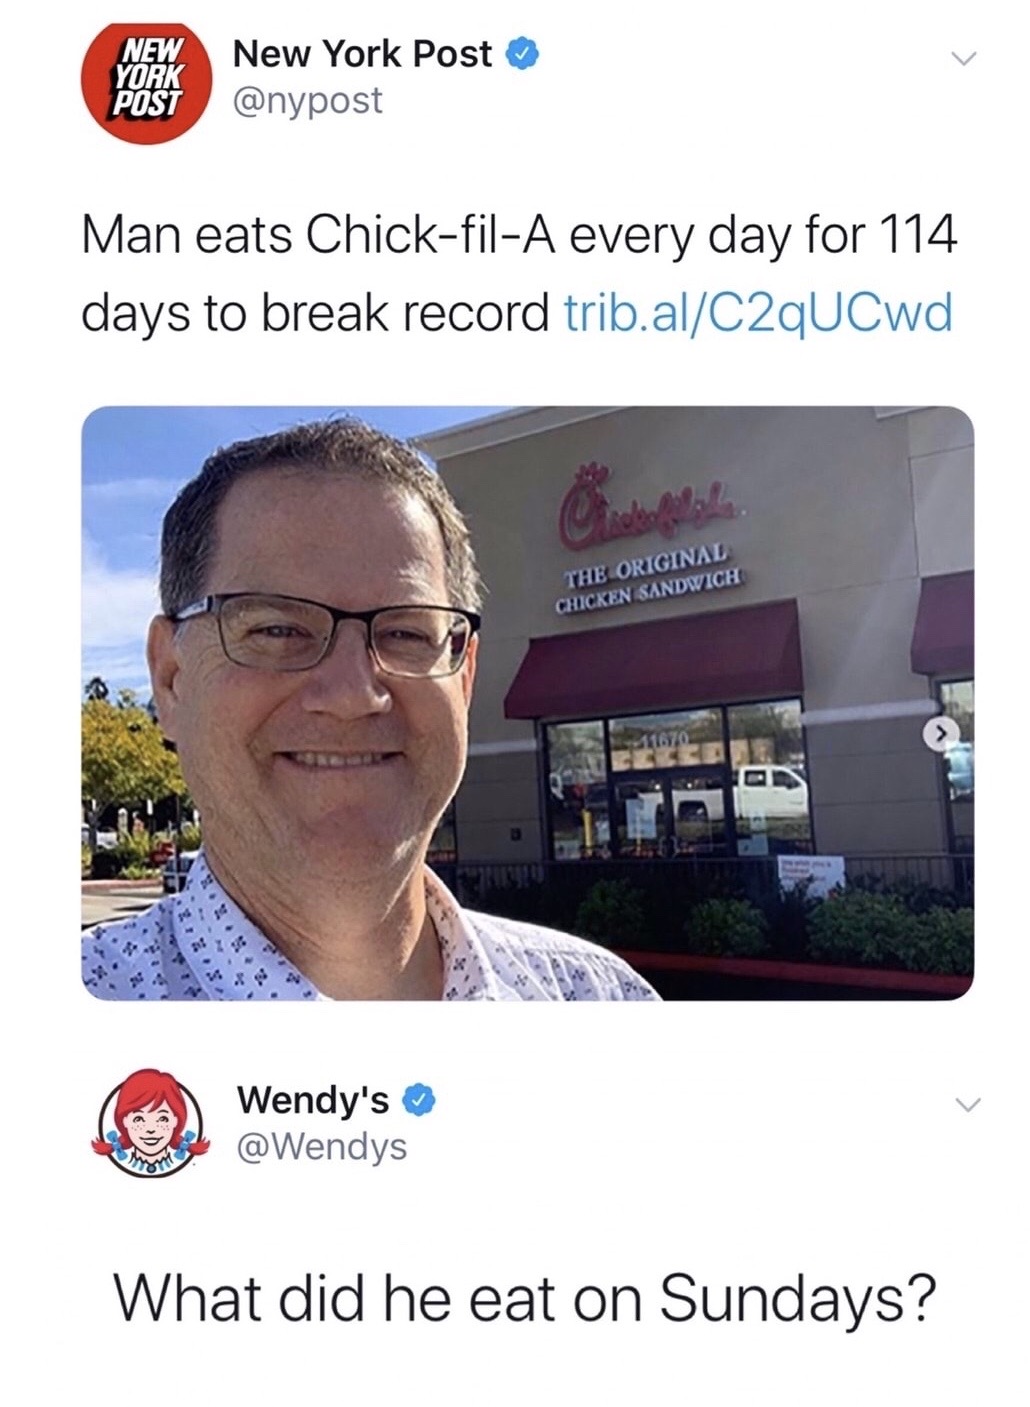 media - New York Post New York Post Man eats ChickfilA every day for 114 days to break record trib.alC2qUCwd The Original Chicken Sandwich 1670 Wendy's What did he eat on Sundays?